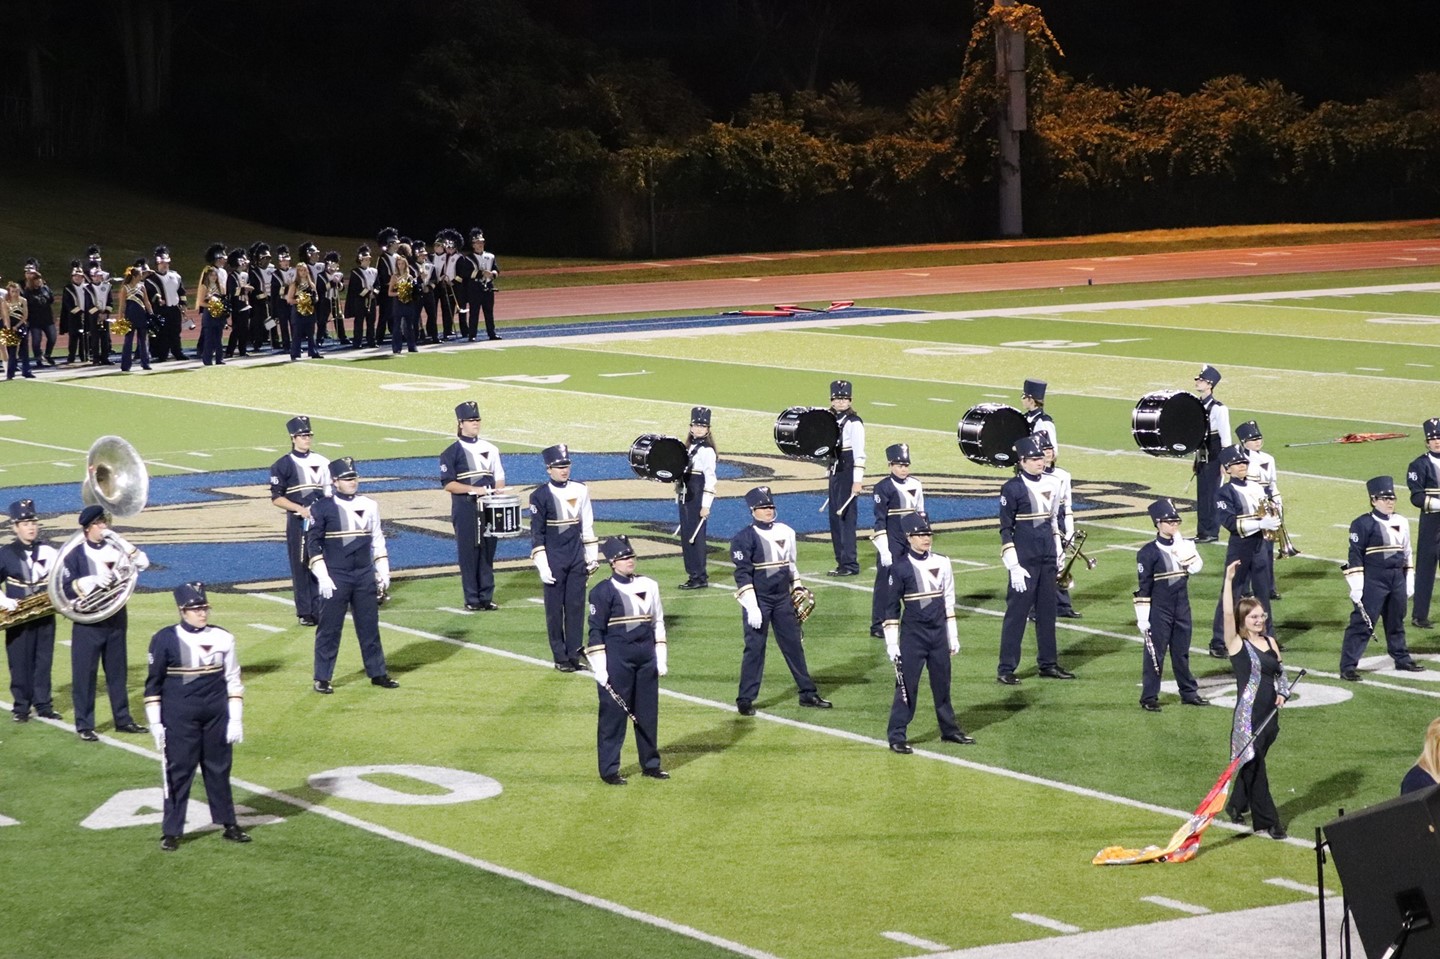 HS Marching Band